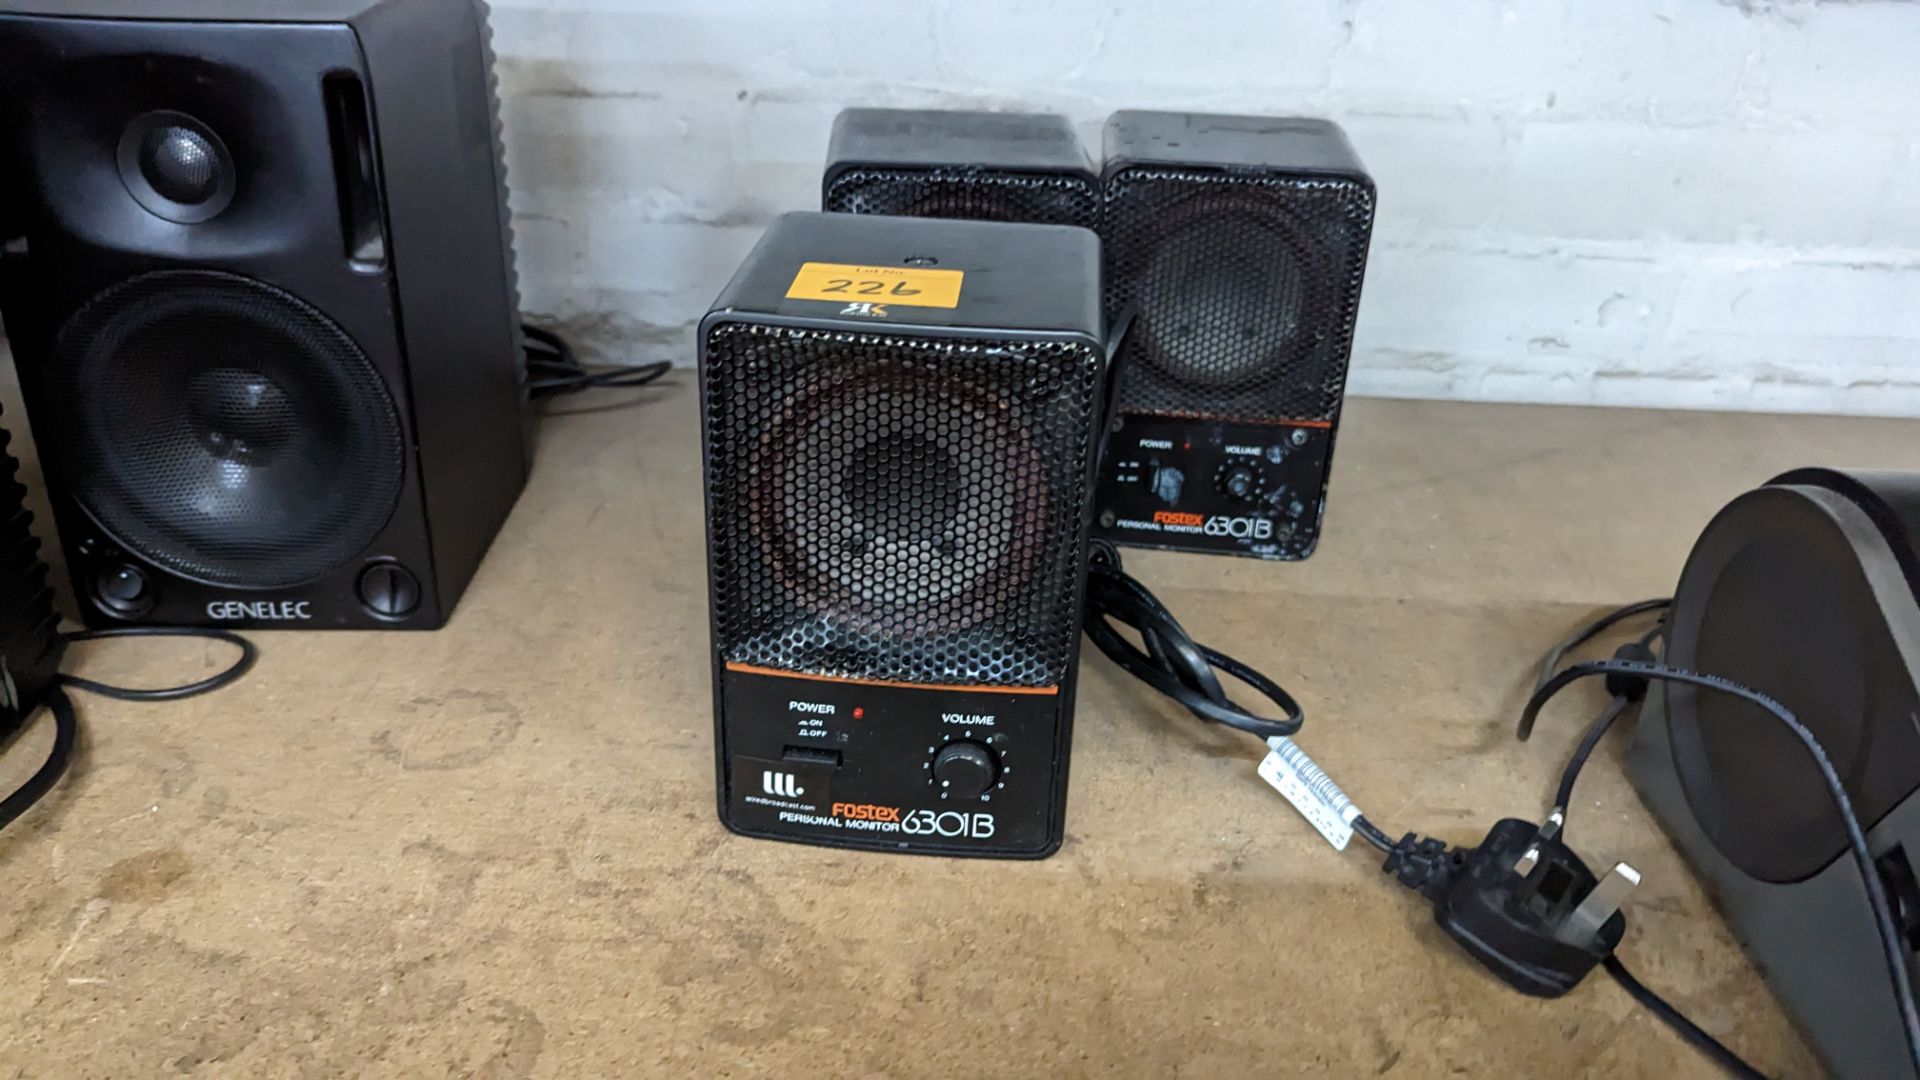 3 off Fostex personal monitor speakers, model 6301B. Please note the specification of each speaker